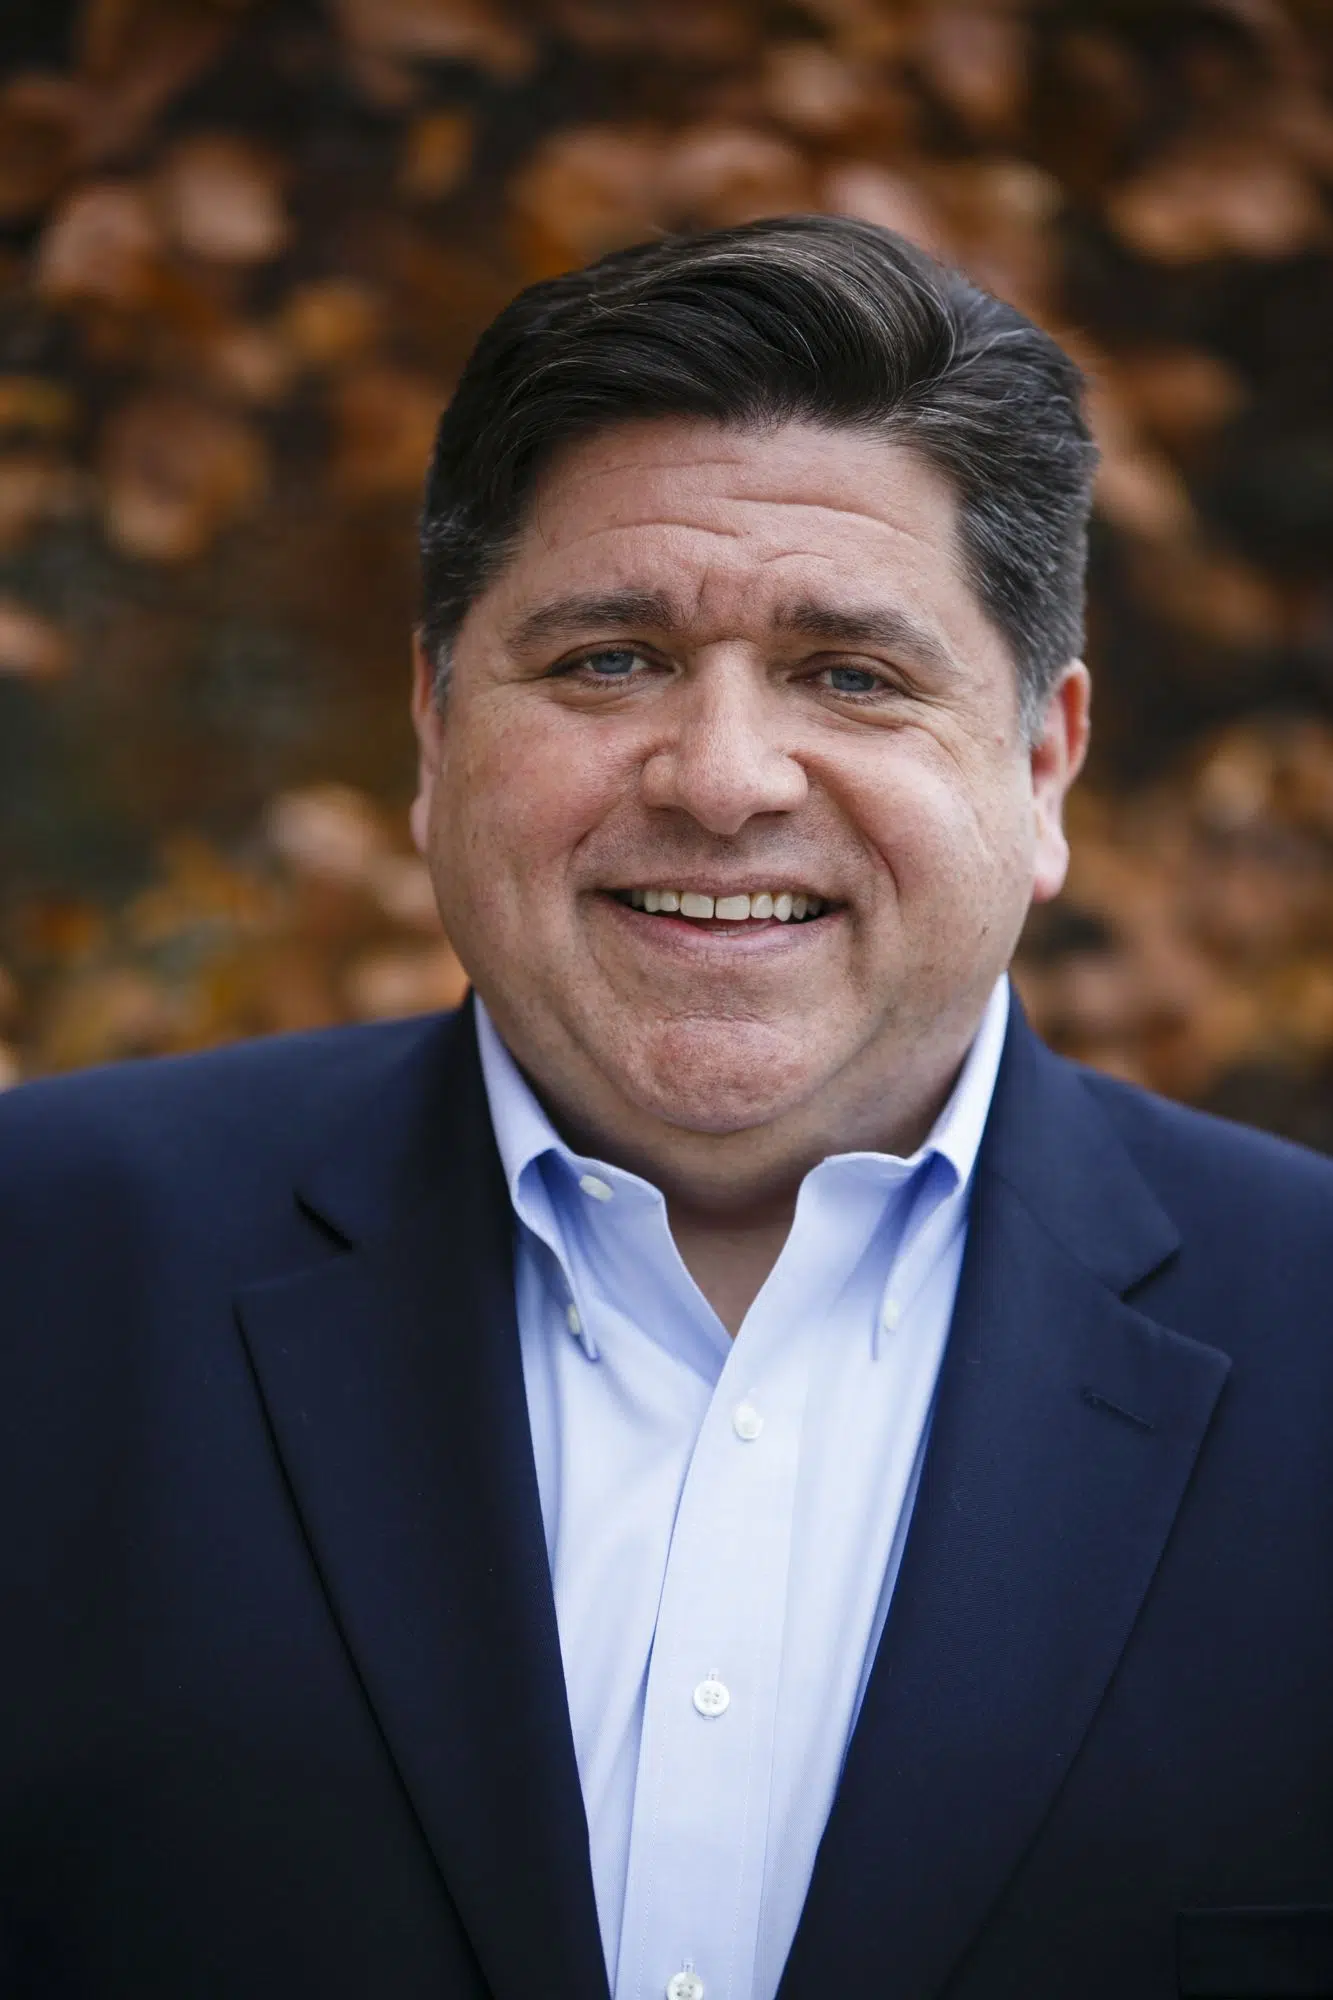 Poll: Democrat Pritzker Leads Governor's Race By 16 Points